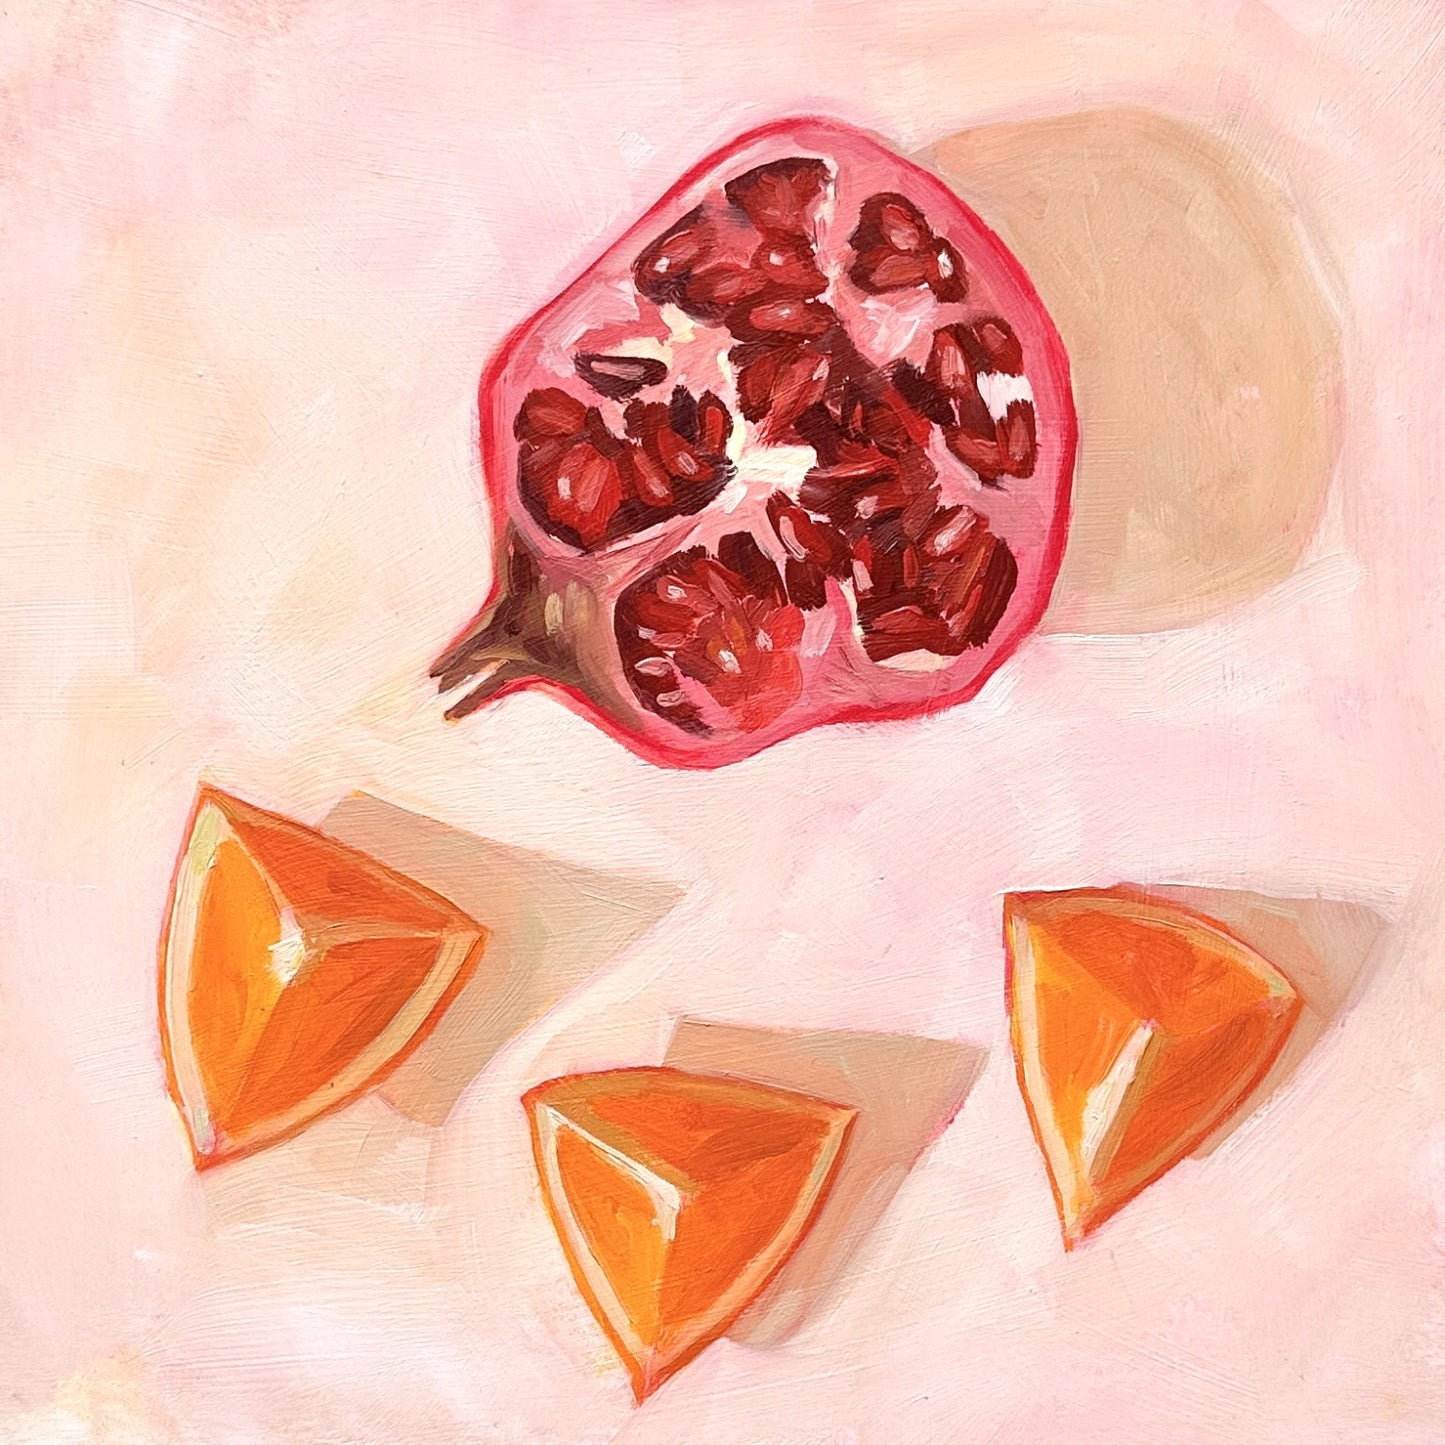 impressionistic original oil painting of a still life setting of pomegranate fruit and three orange slices on a textured cream background with soft shadows